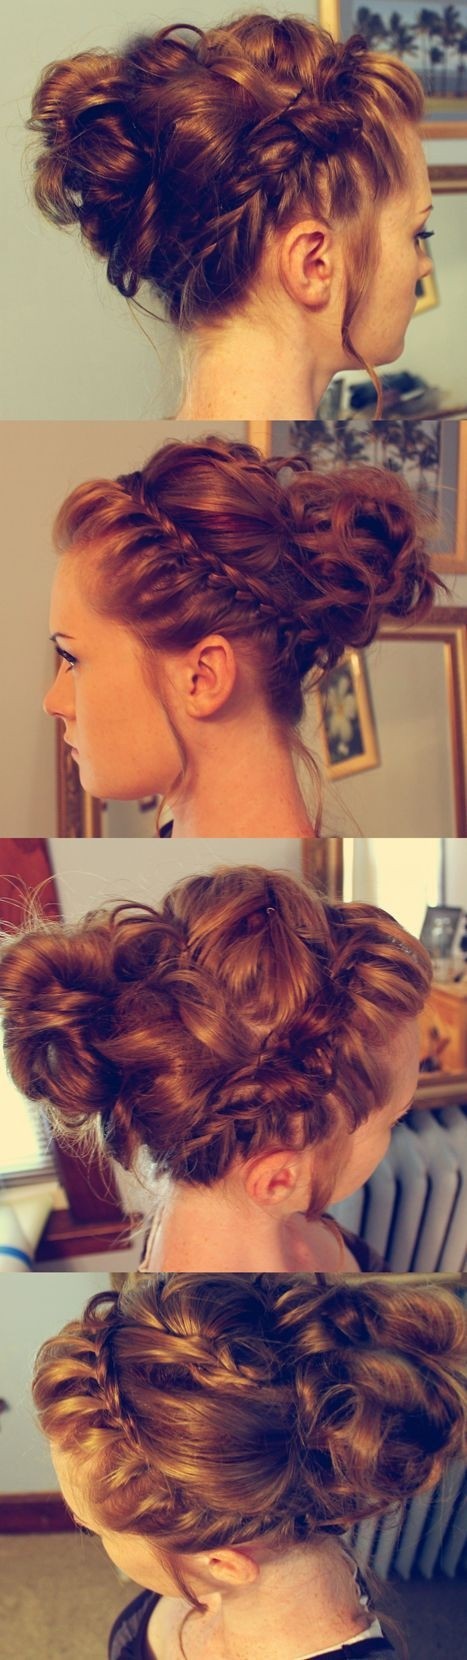 Crown Braid Updo for Prom Hairstyles